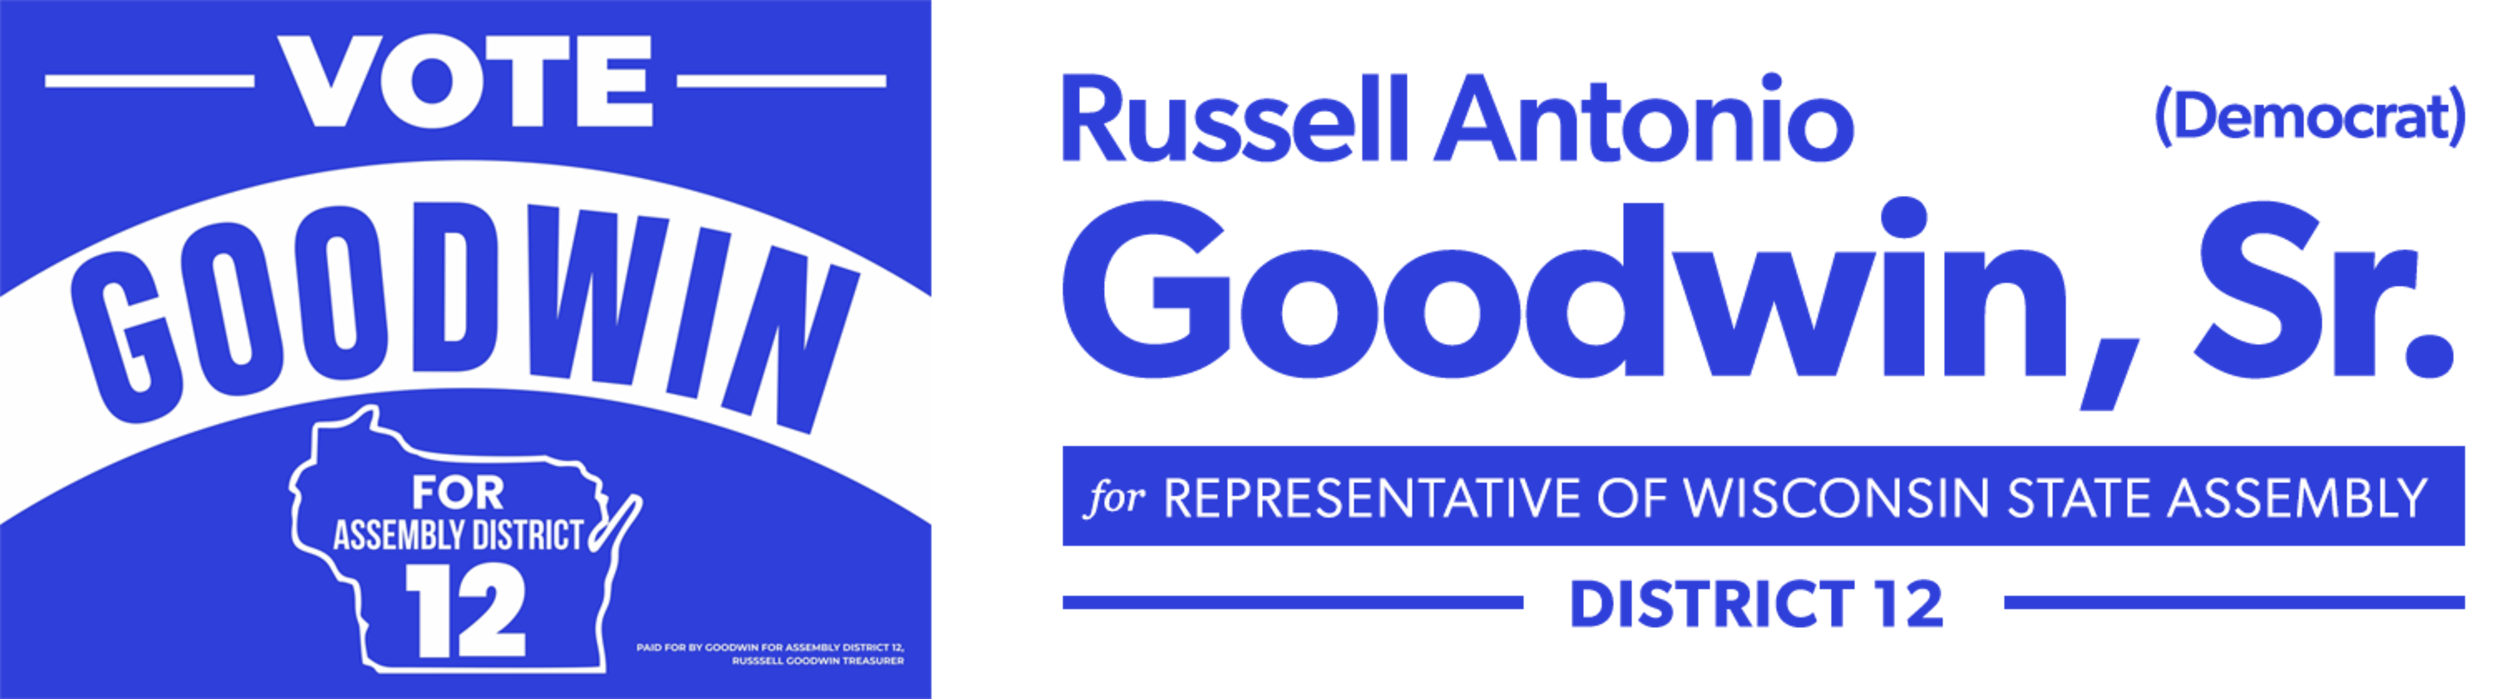 Vote Russell Antonio Goodwin, Sr. for Representative of Wisconsin State Assembly District 12